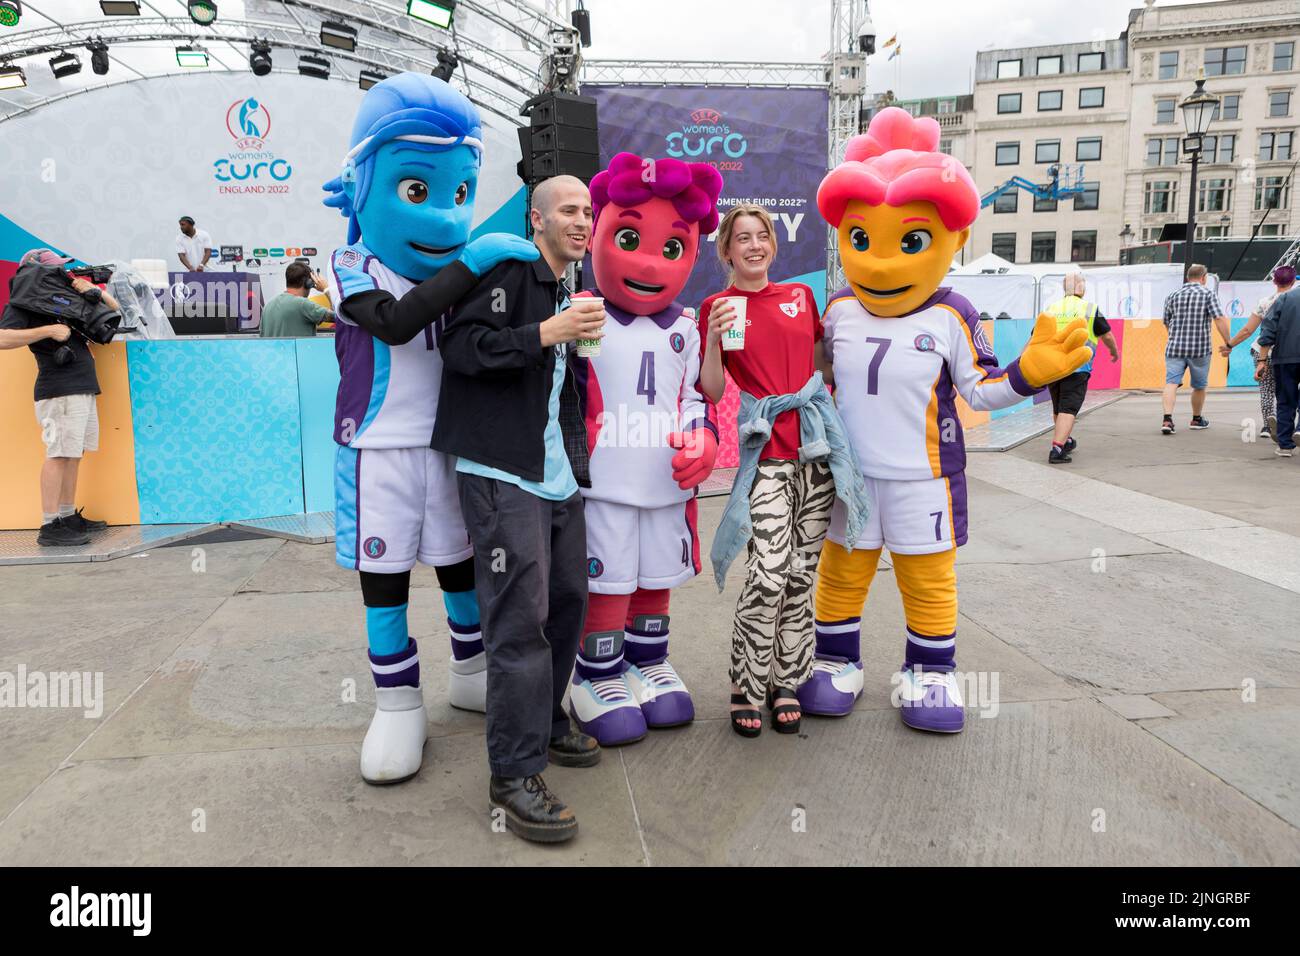 Football fans gather in Trafalgar Square ahead of tonight’s UEFA Women’s Euro 2022 Finals, in which England plays against Germany.   Image shot on 31s Stock Photo